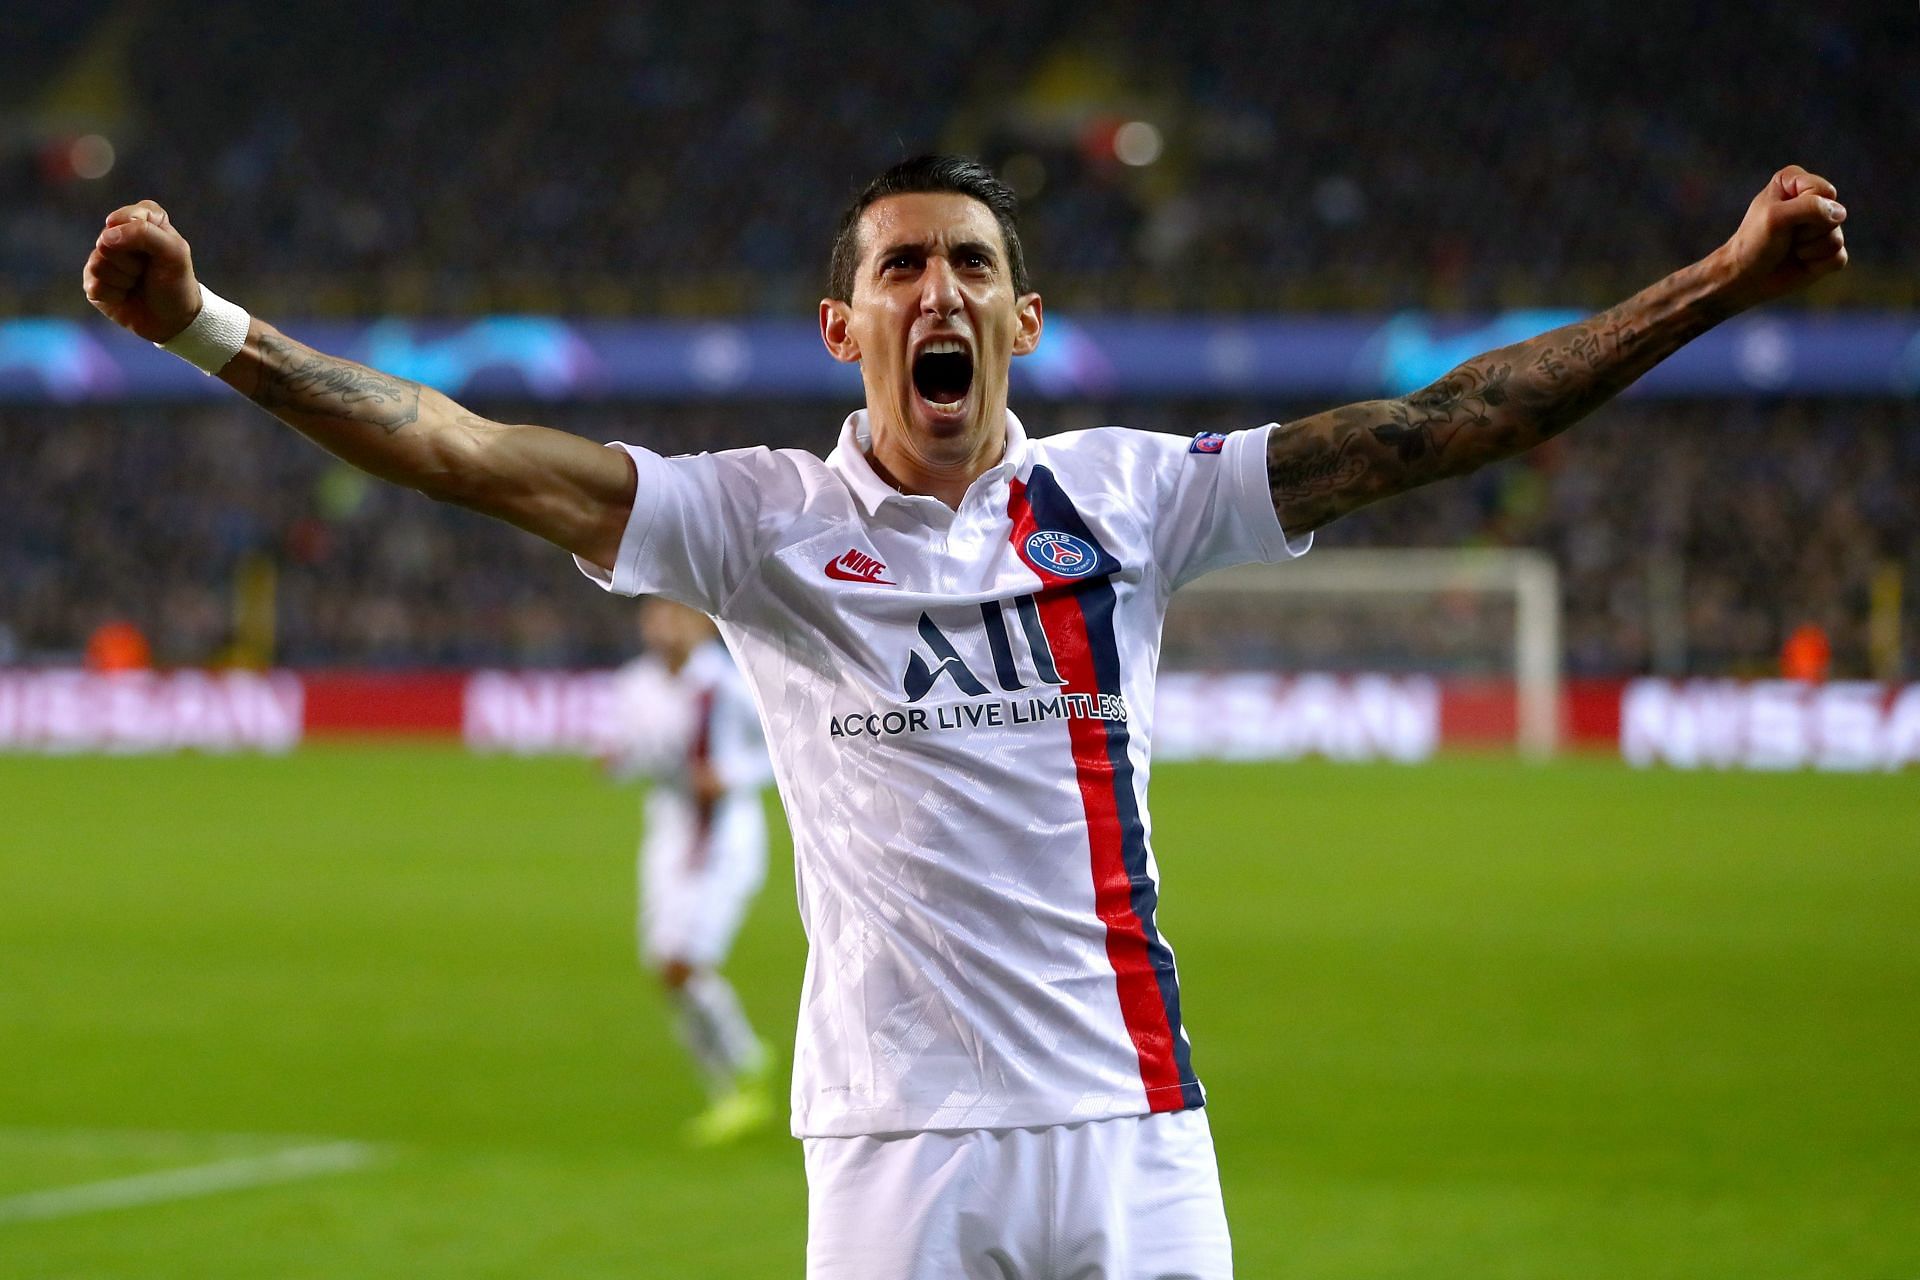 Angel Di Maria is regarded as one of the best playmakers of the 21st century